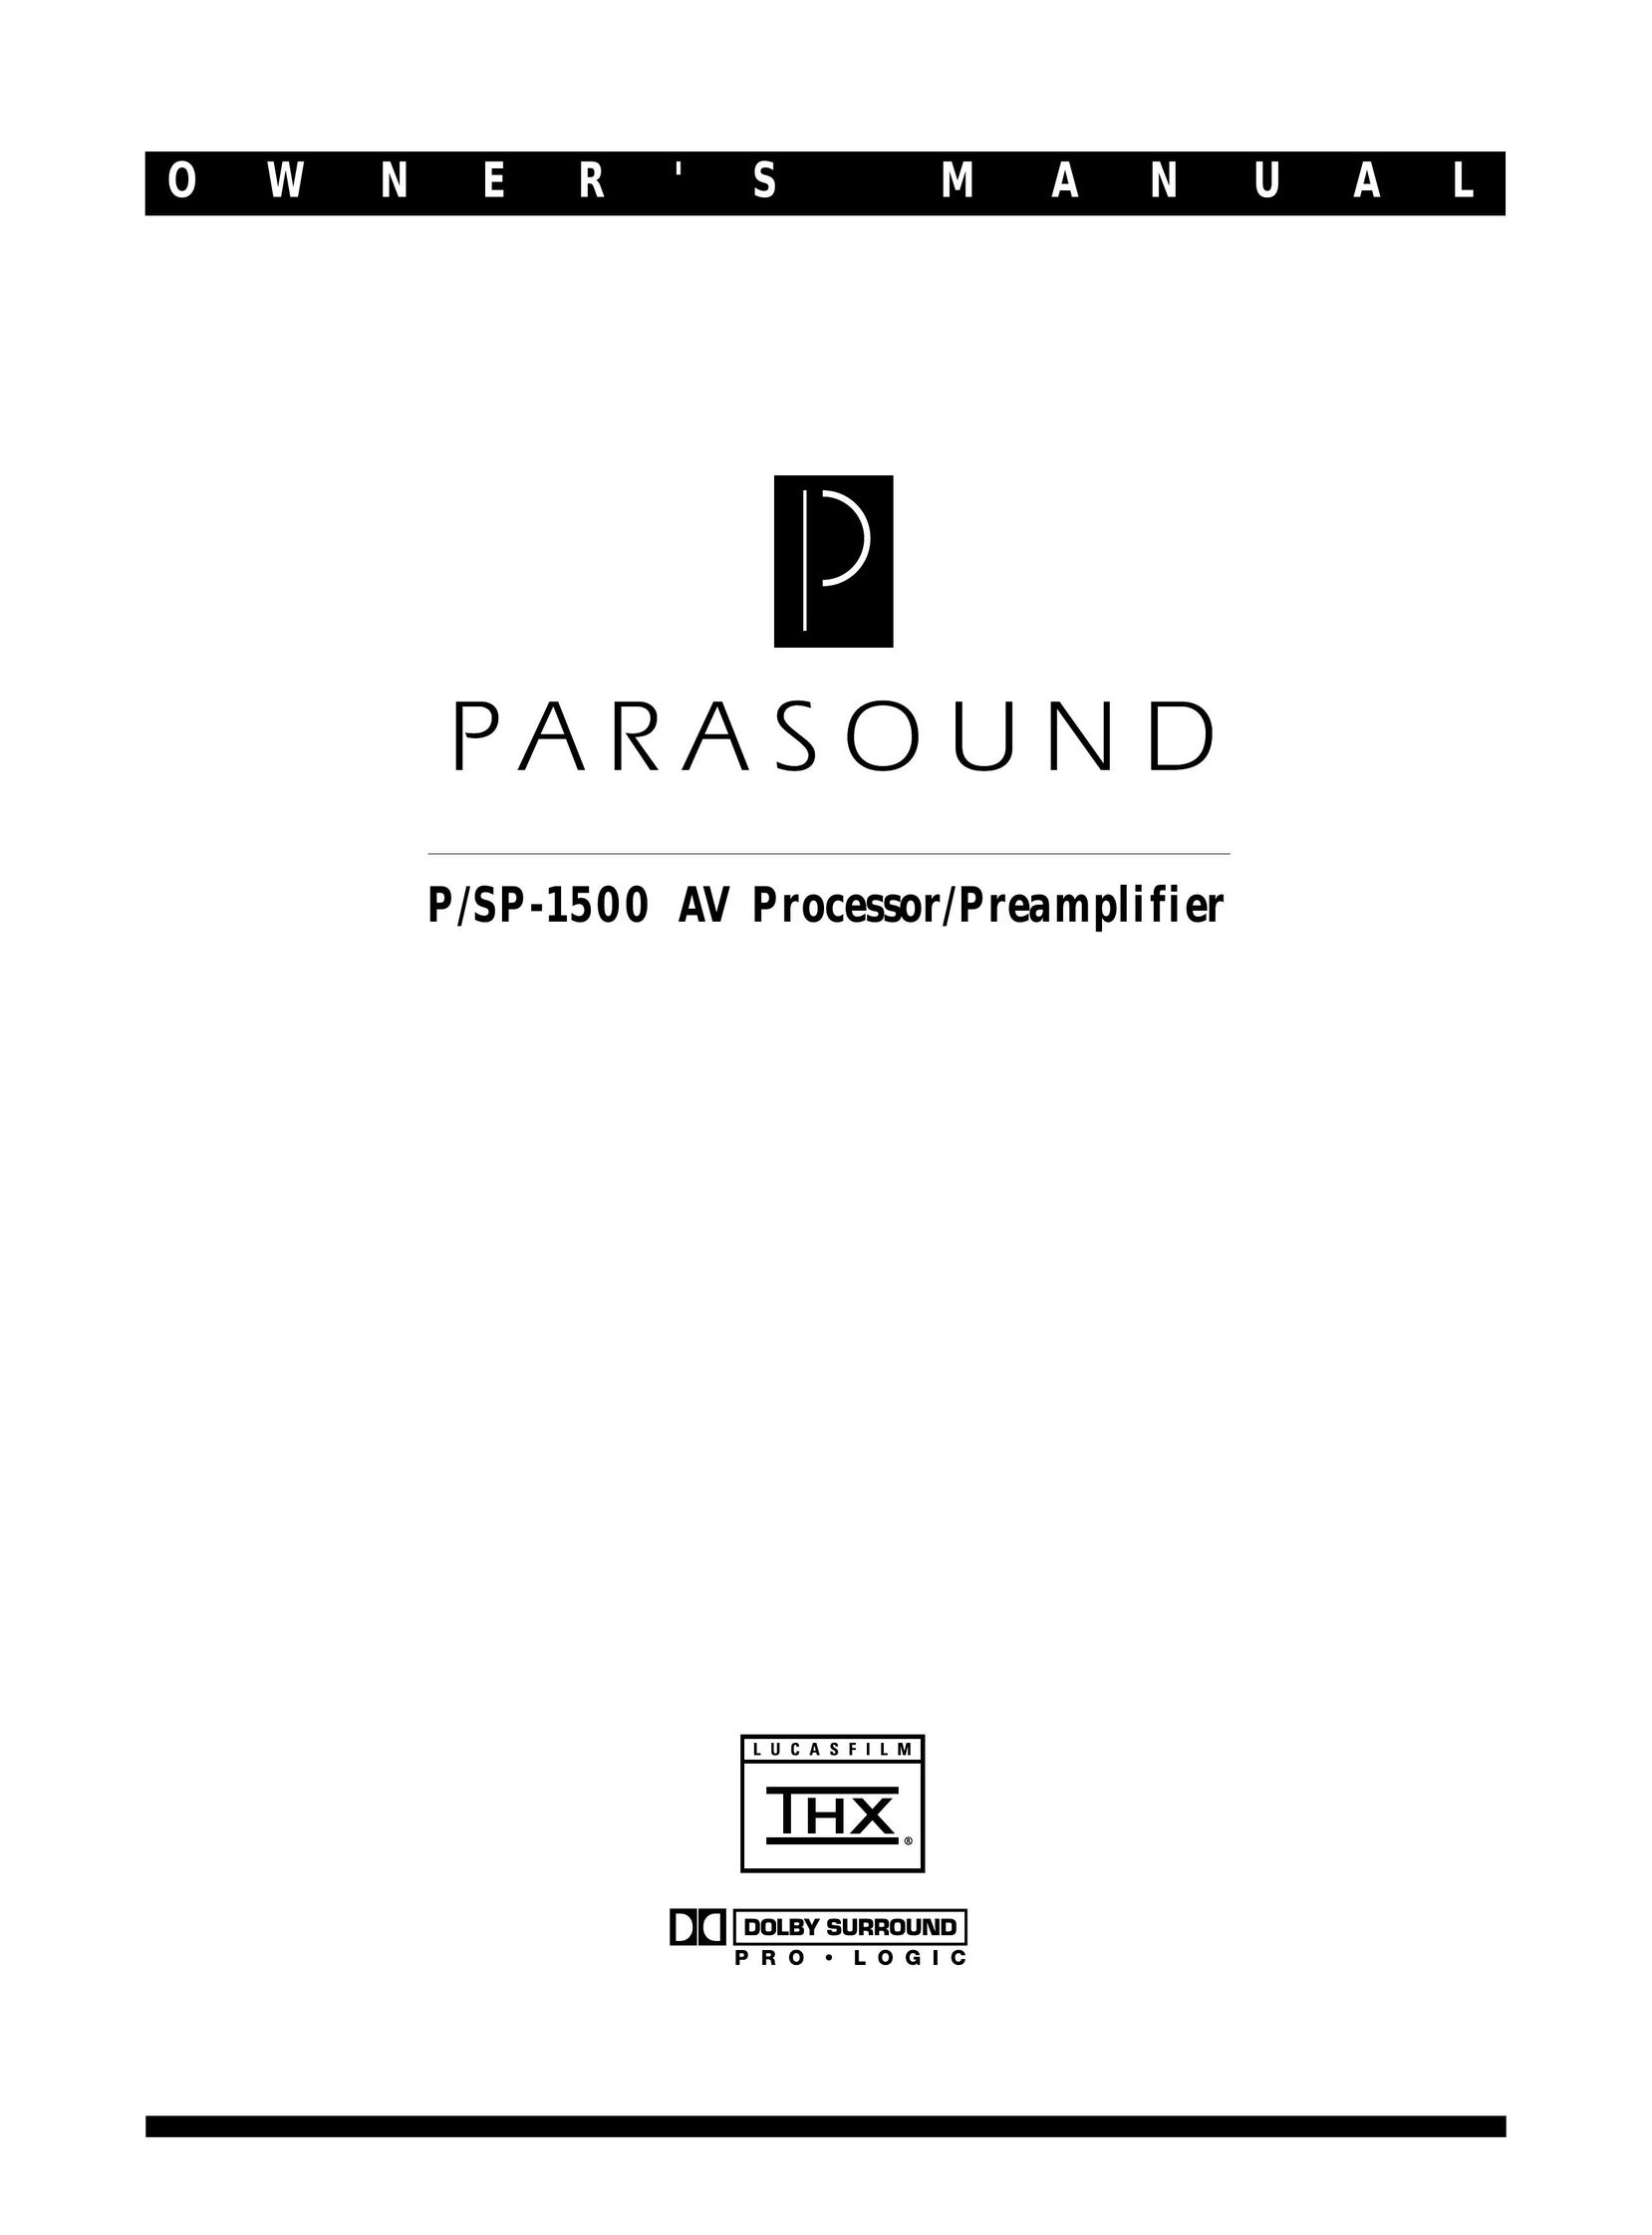 Parasound P/SP-1500 Stereo Amplifier User Manual